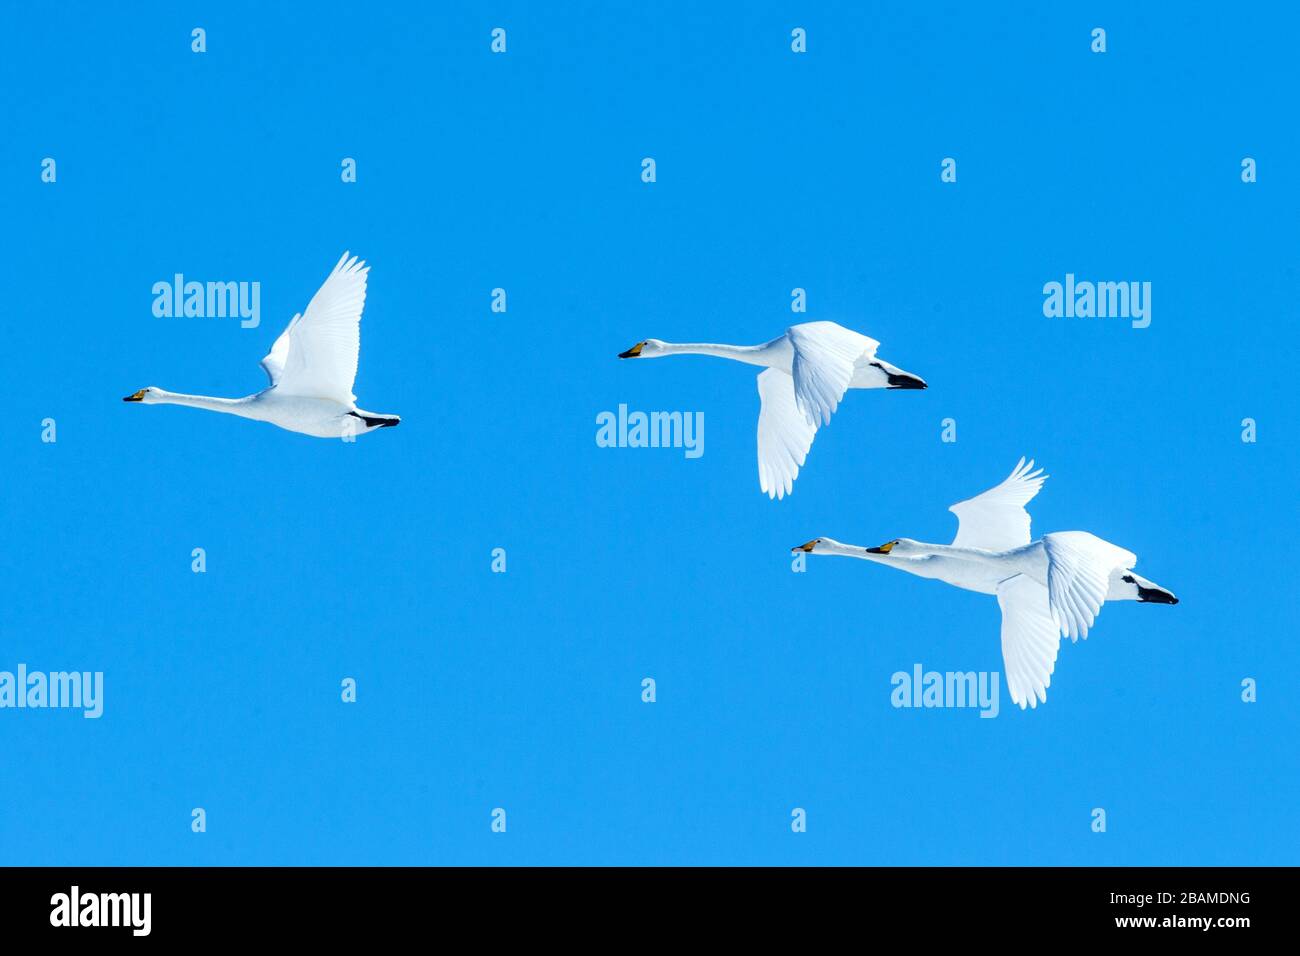 Flock of whooper swans (Cygnus cygnus) in flight with outstretched wings against blue sky, winter, Hokkaido, Japan, beautiful royal white birds flying Stock Photo